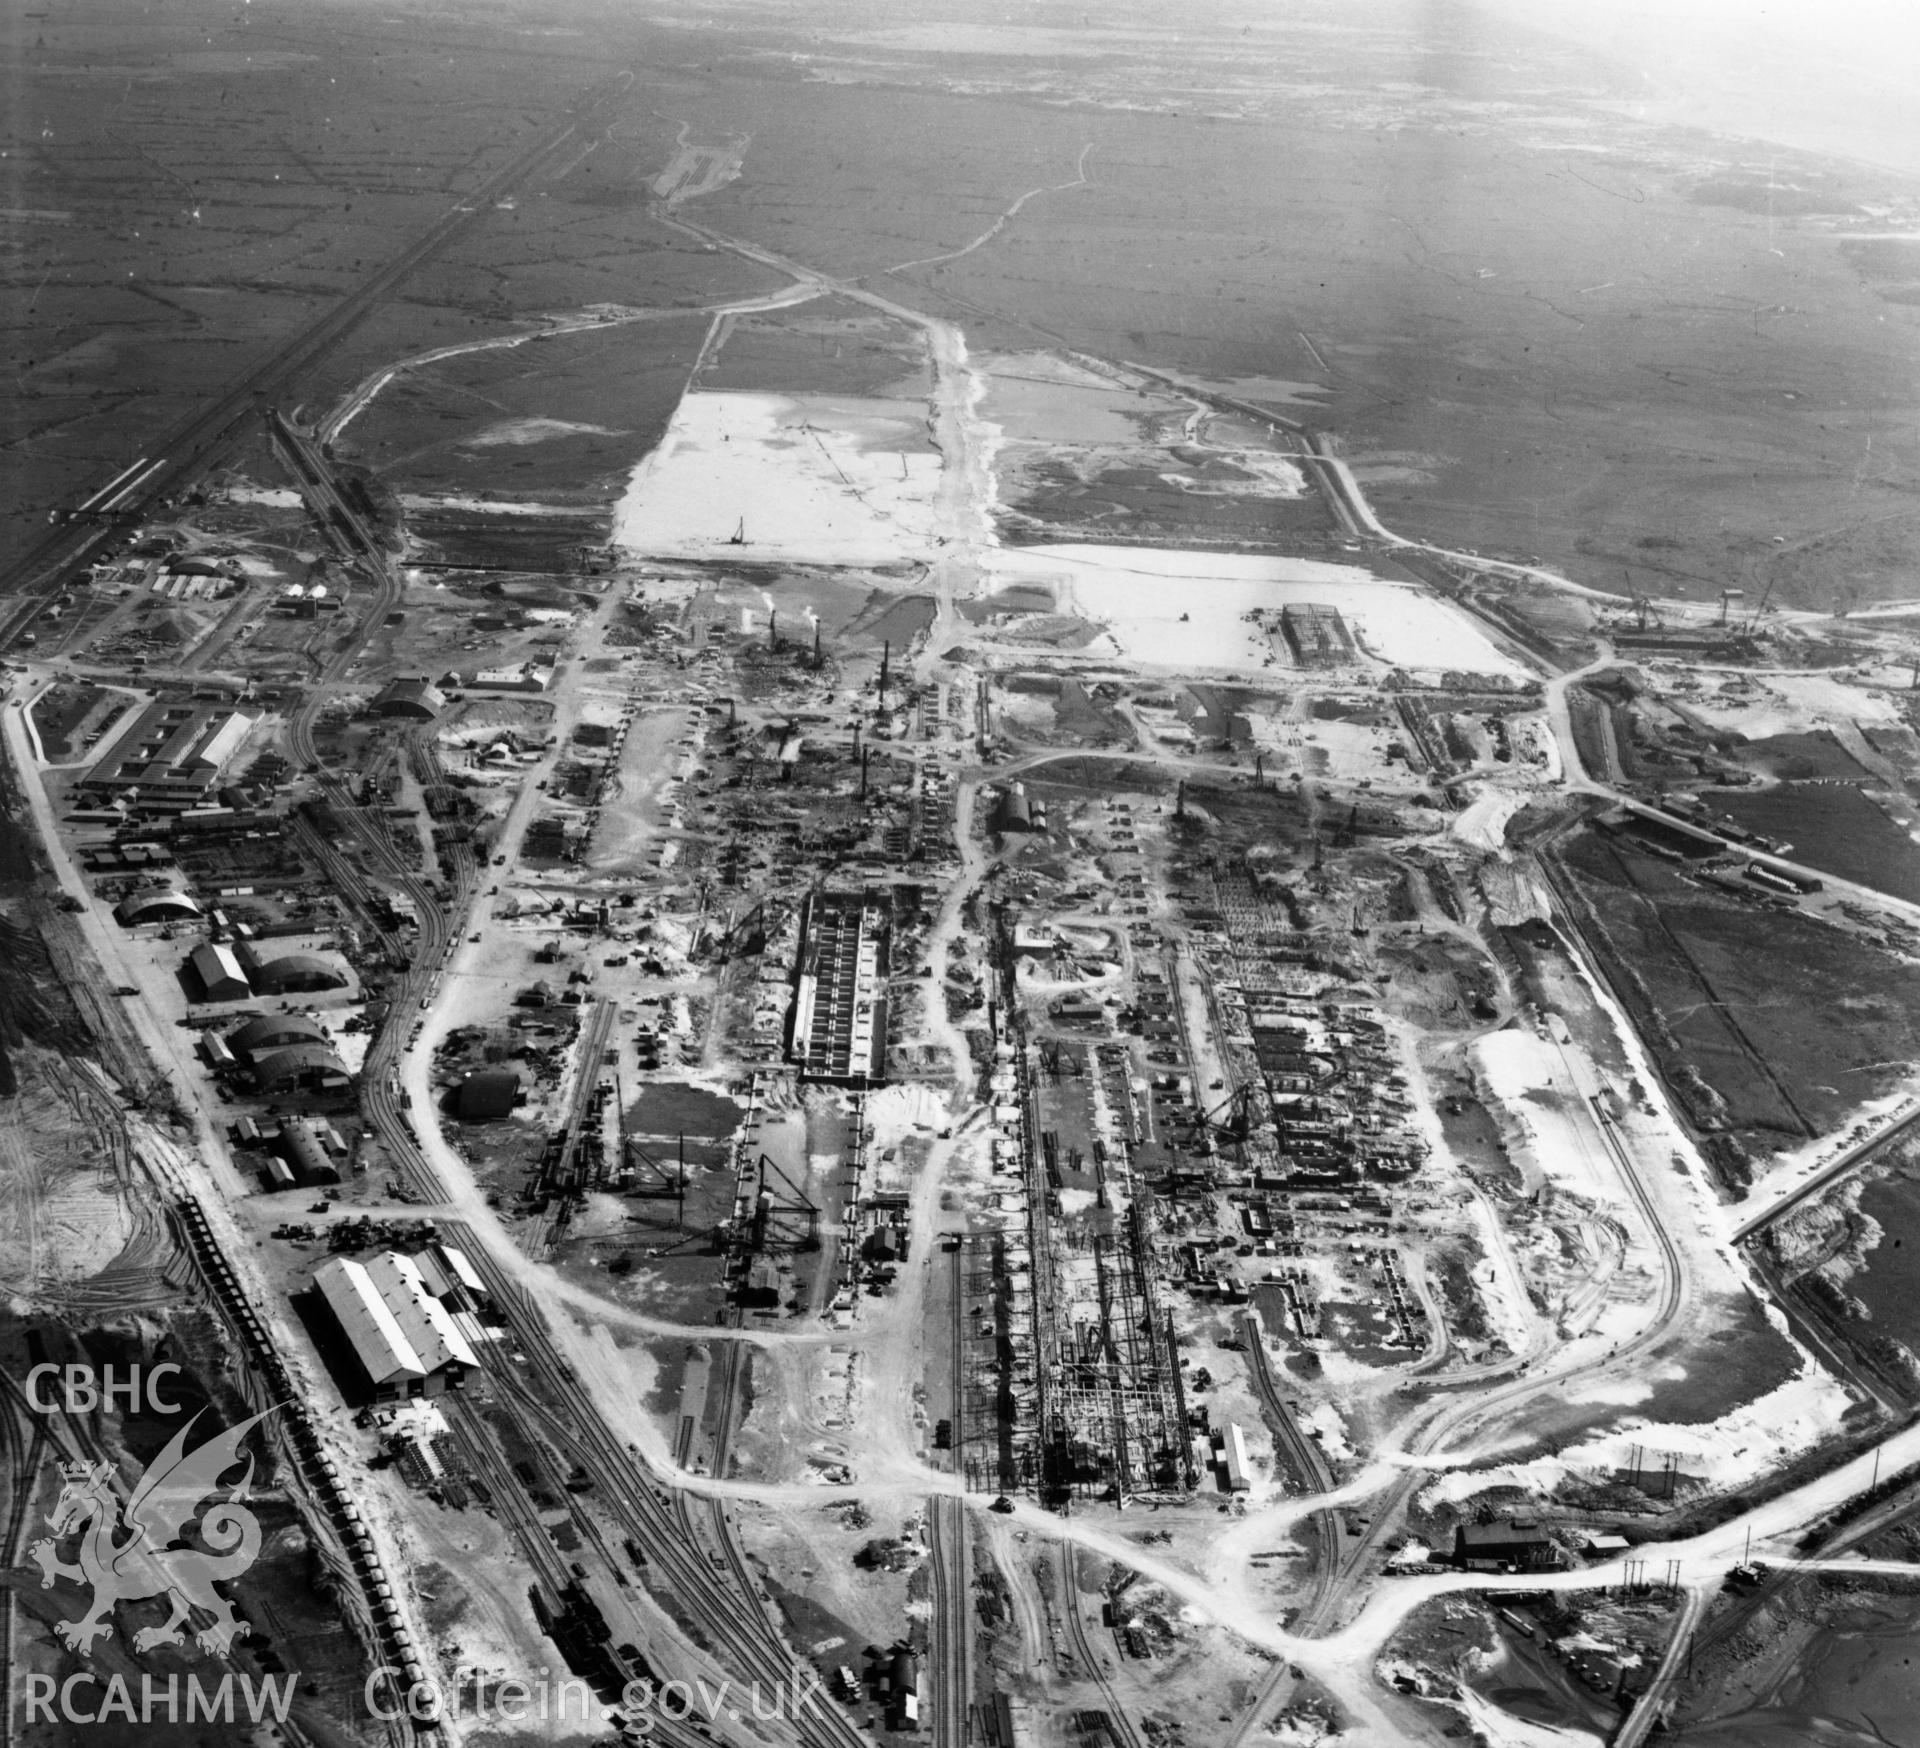 General view of Abbey Steelworks, Port Talbot, under construction. Oblique aerial photograph, 5?" cut roll film.